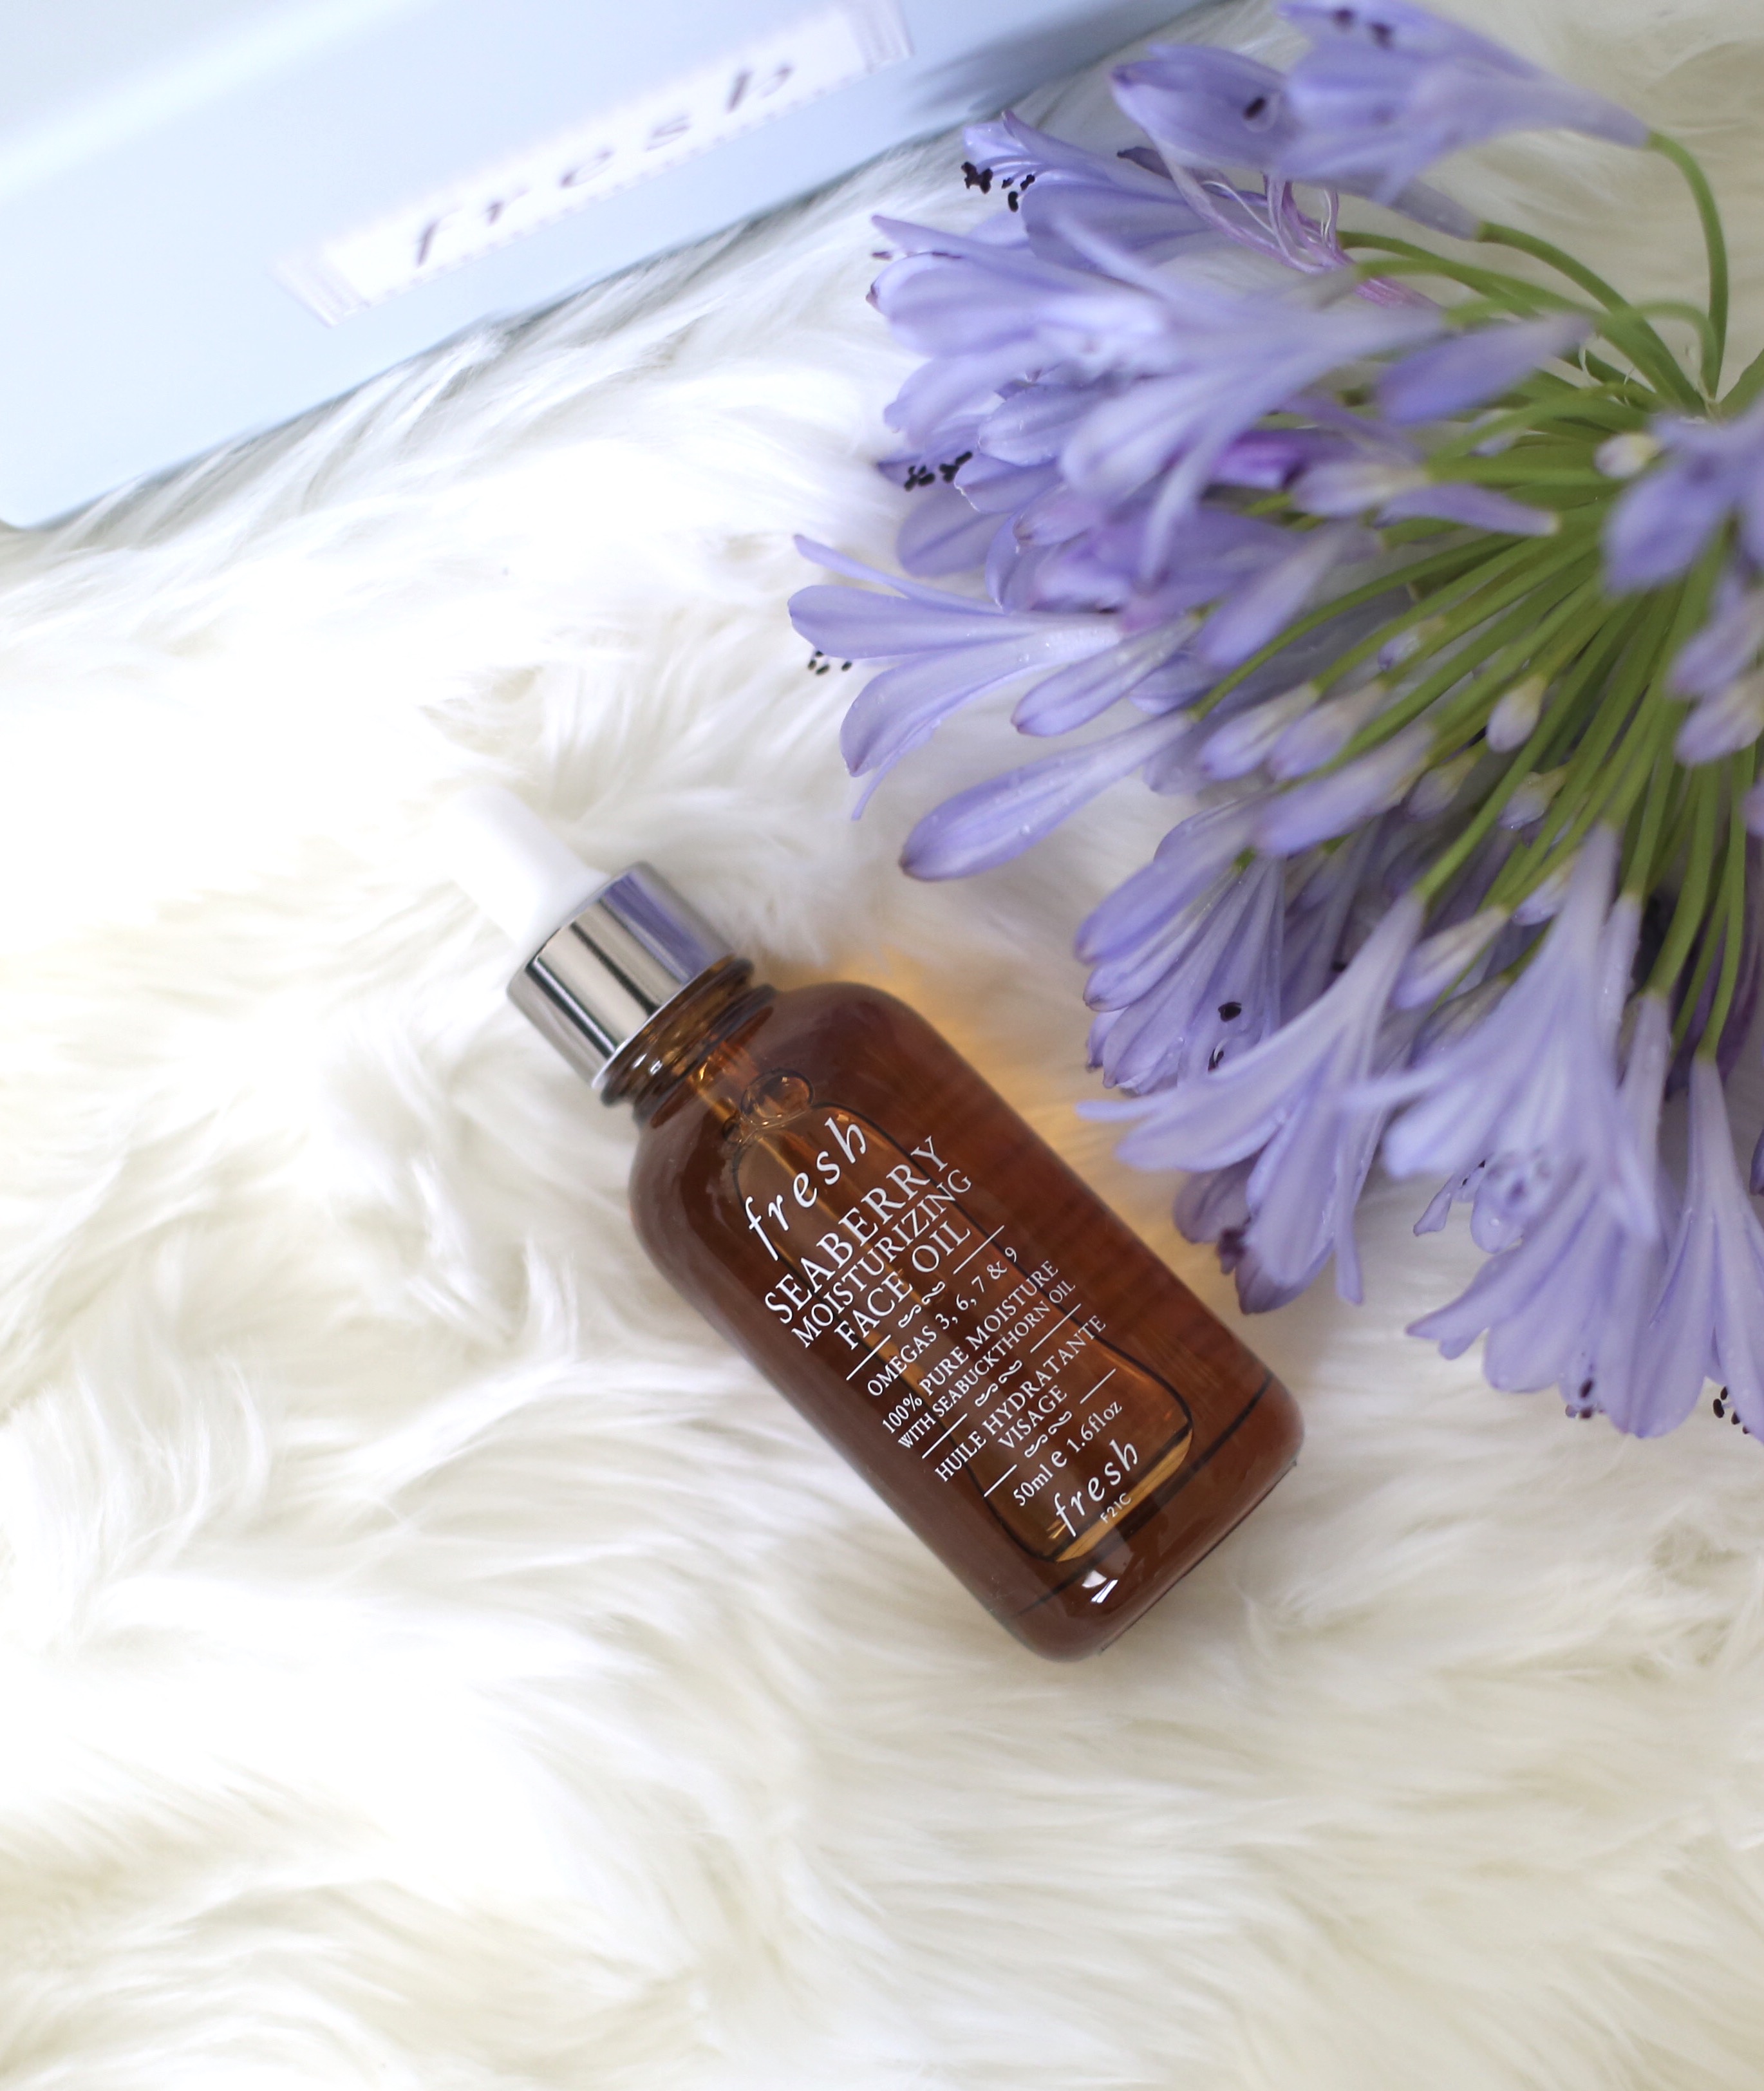 Fresh Seaberry Moisturizing Face Oil Review